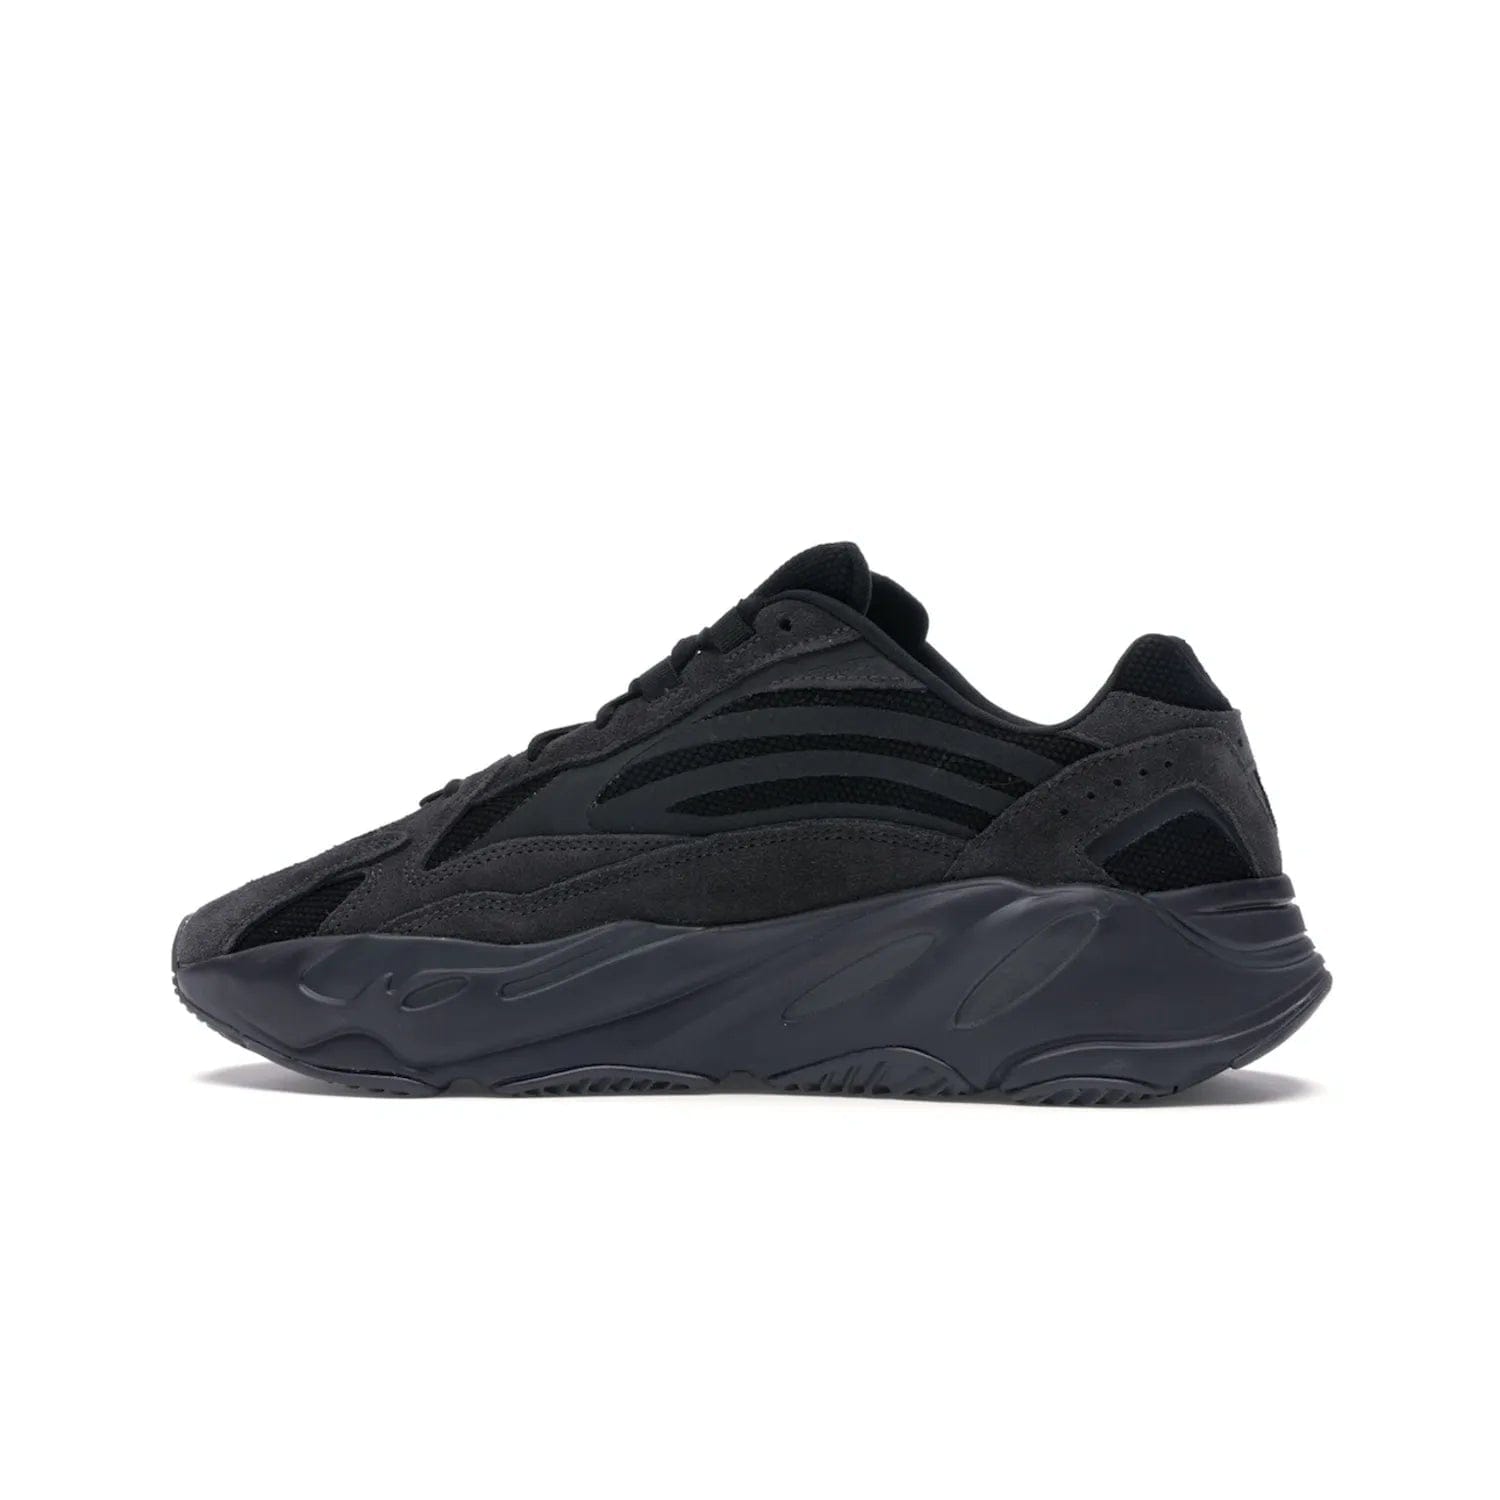 adidas Yeezy Boost 700 V2 Vanta - Image 20 - Only at www.BallersClubKickz.com - Introducing the adidas Yeezy Boost 700 V2 Vanta - a sleek and stylish all-black design featuring a combination of mesh, leather, and suede construction with signature Boost cushioning in the sole. The ultimate in comfort and support.